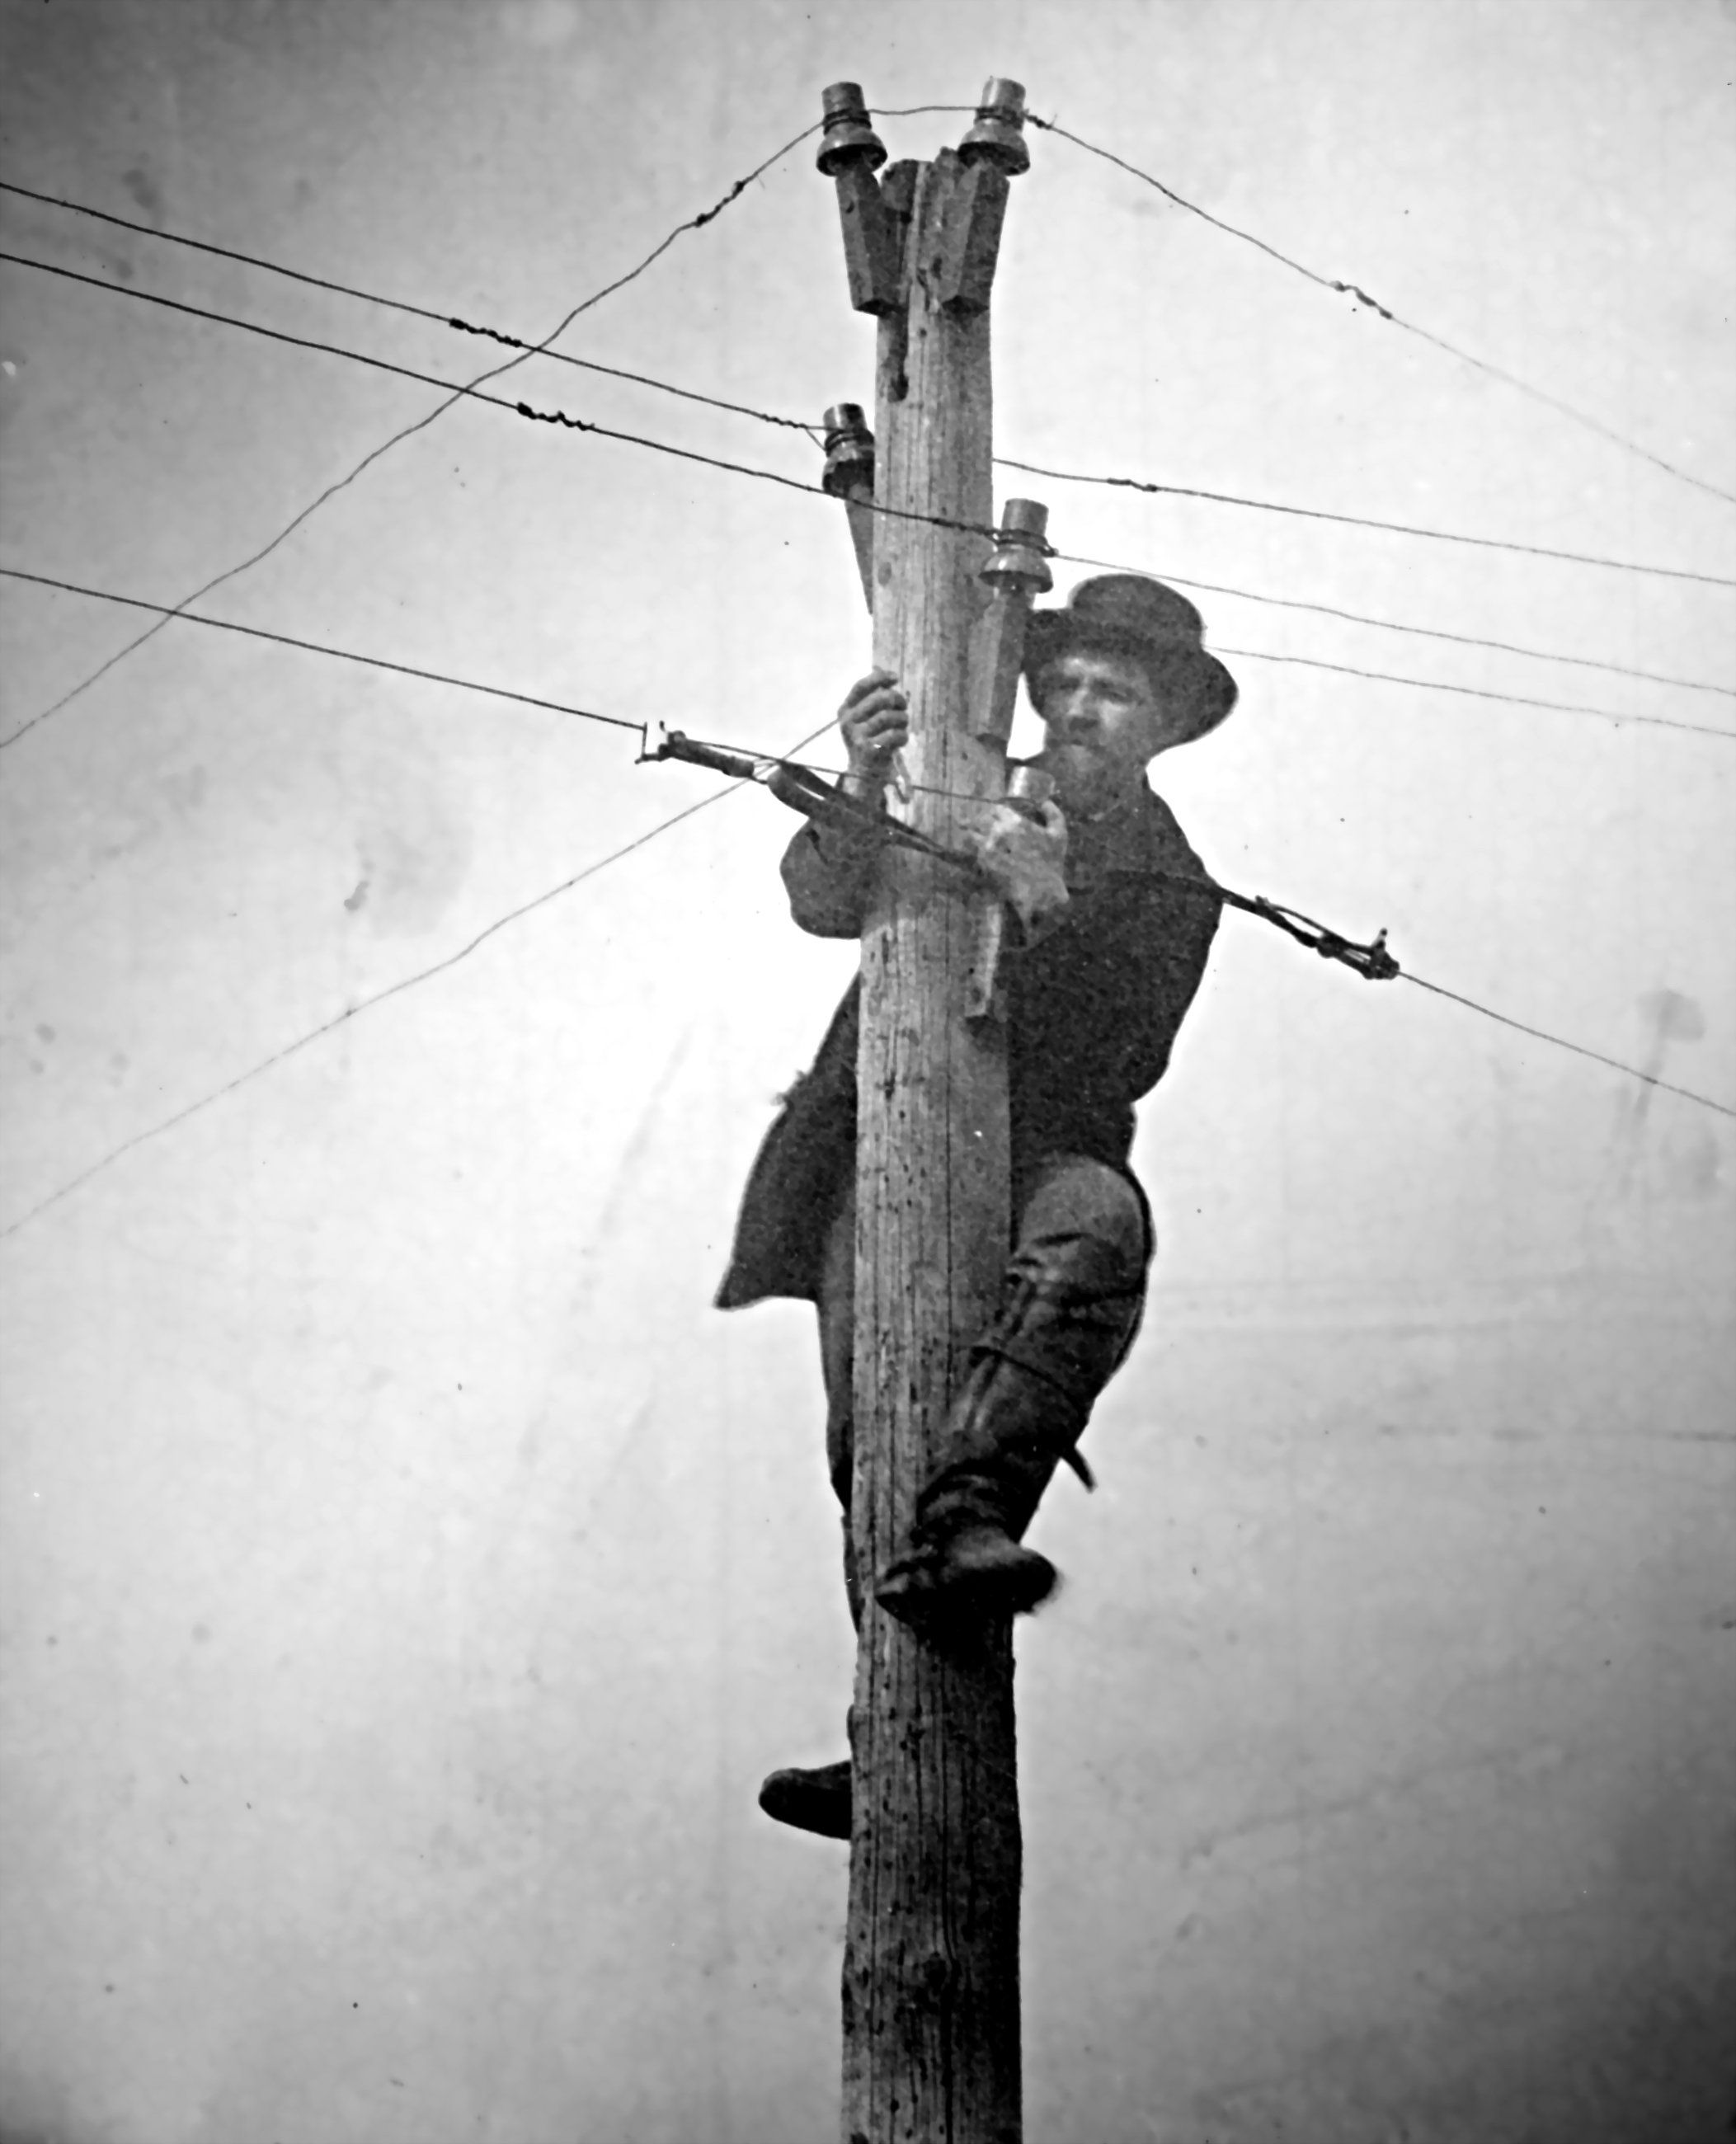 https://thefulcrum.us/media-library/man-maintaining-telegraph-wire.jpg?id=50994677&width=2105&height=2600&quality=85&coordinates=0%2C0%2C0%2C0